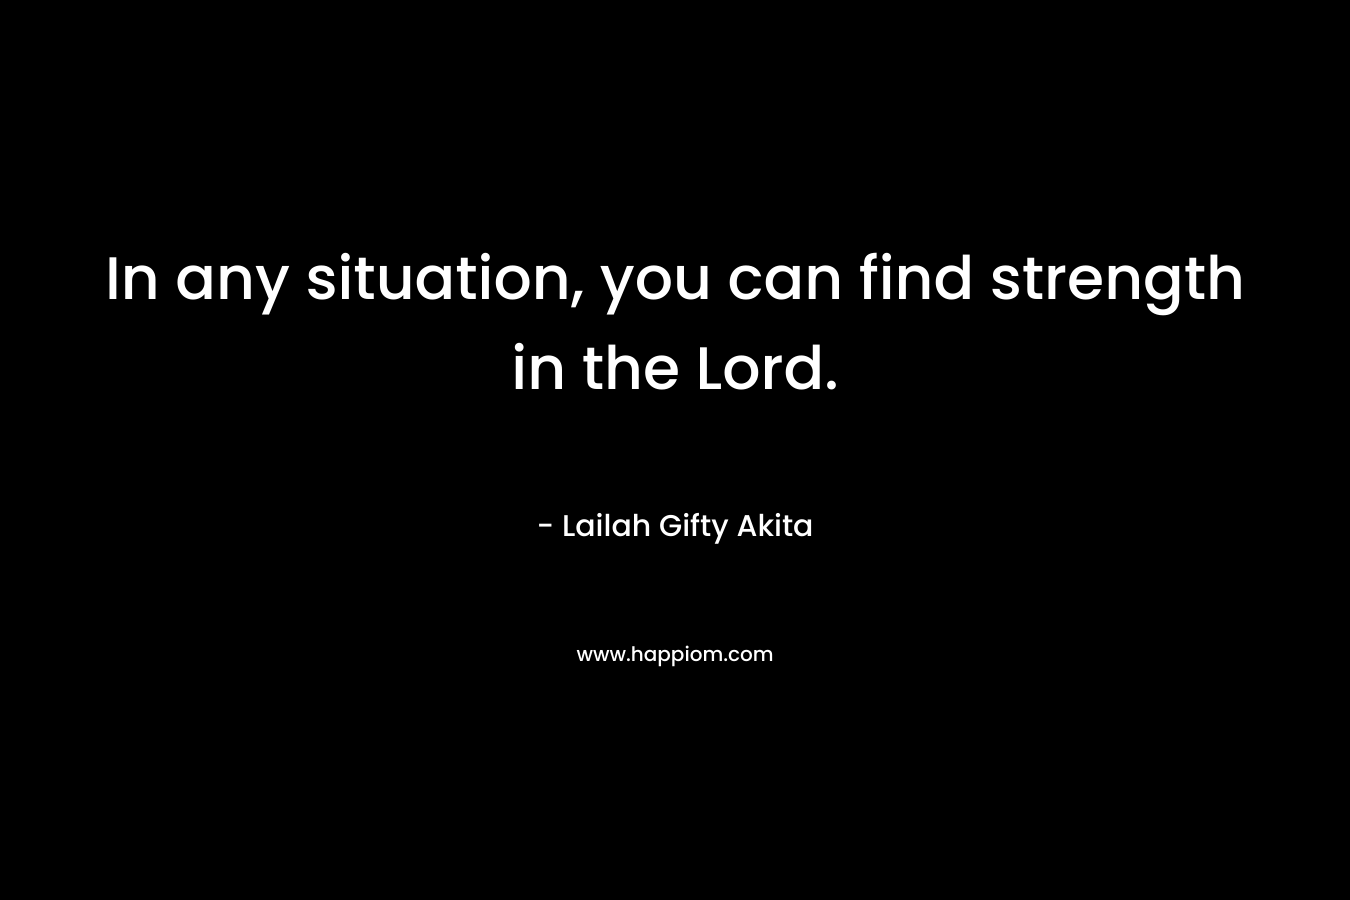 In any situation, you can find strength in the Lord.